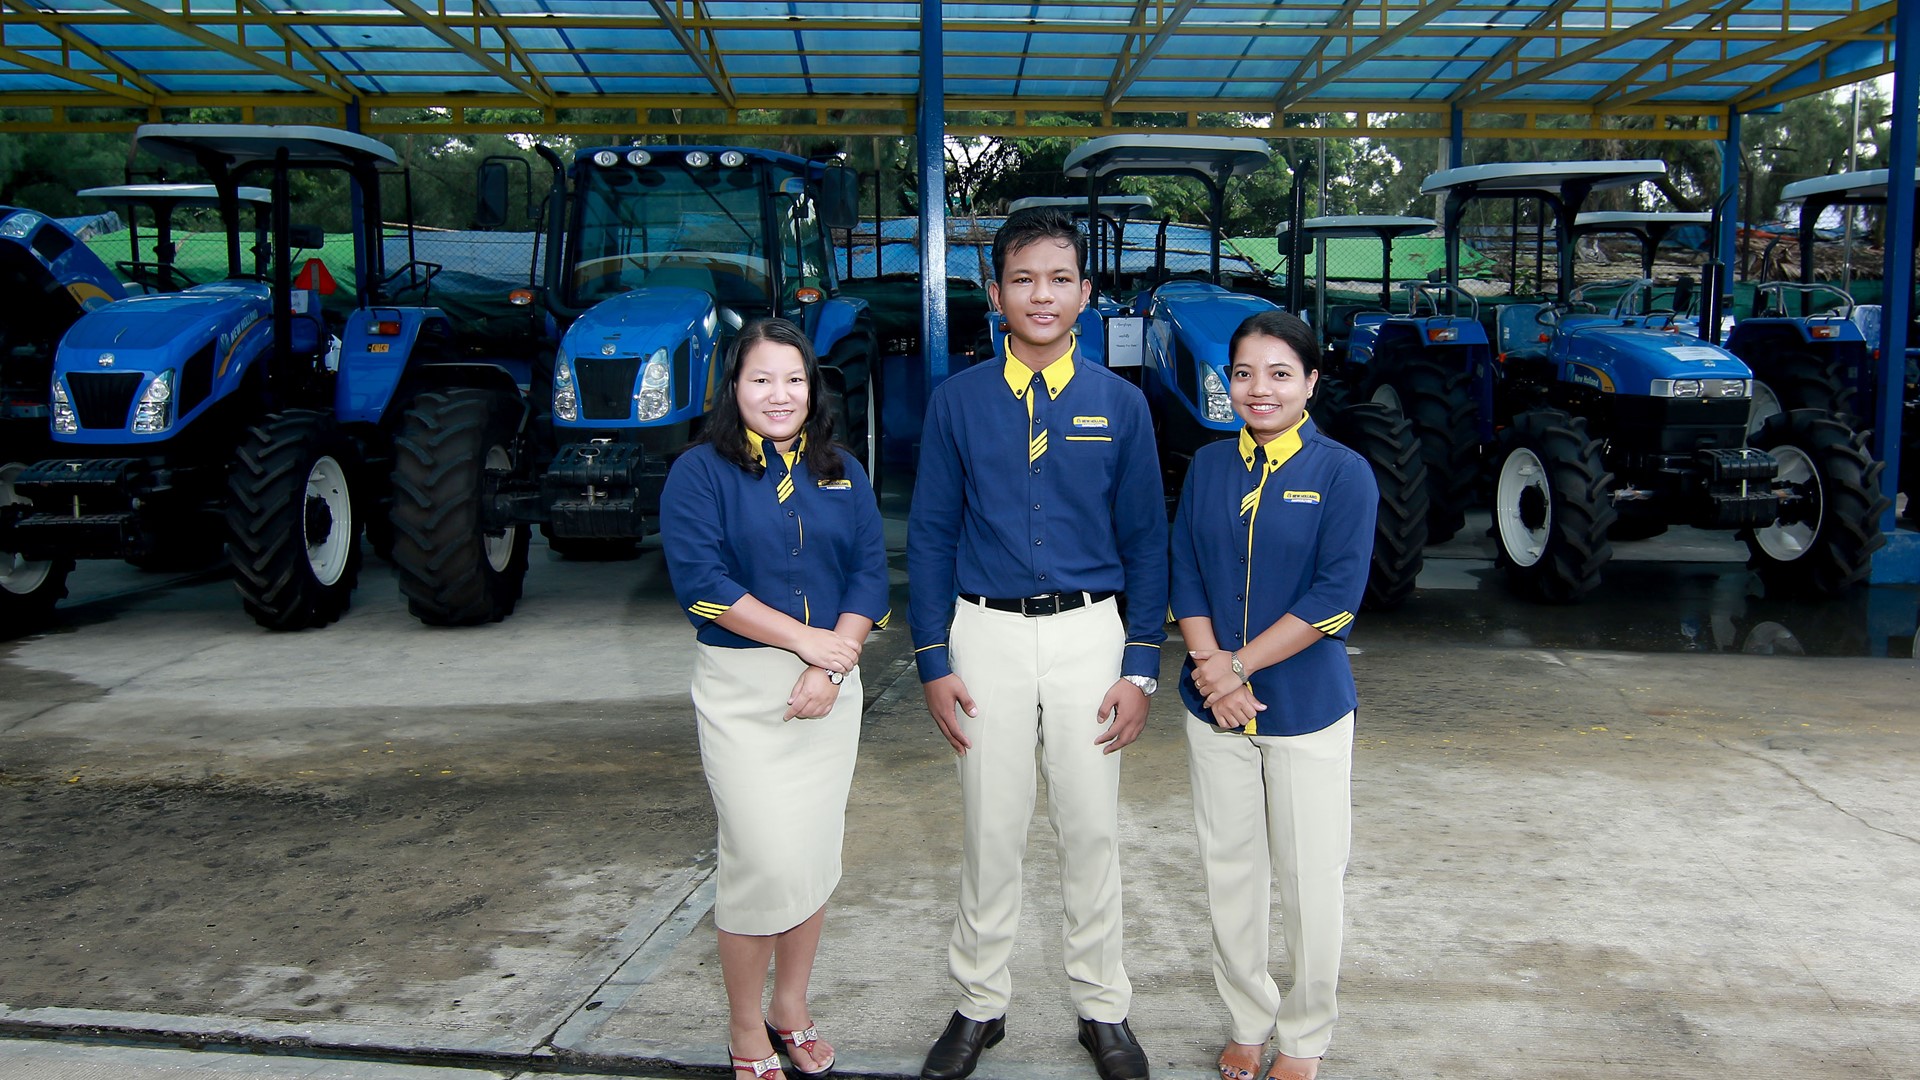 New Holland Agriculture hosts Advantage Training 2017 in South East Asia